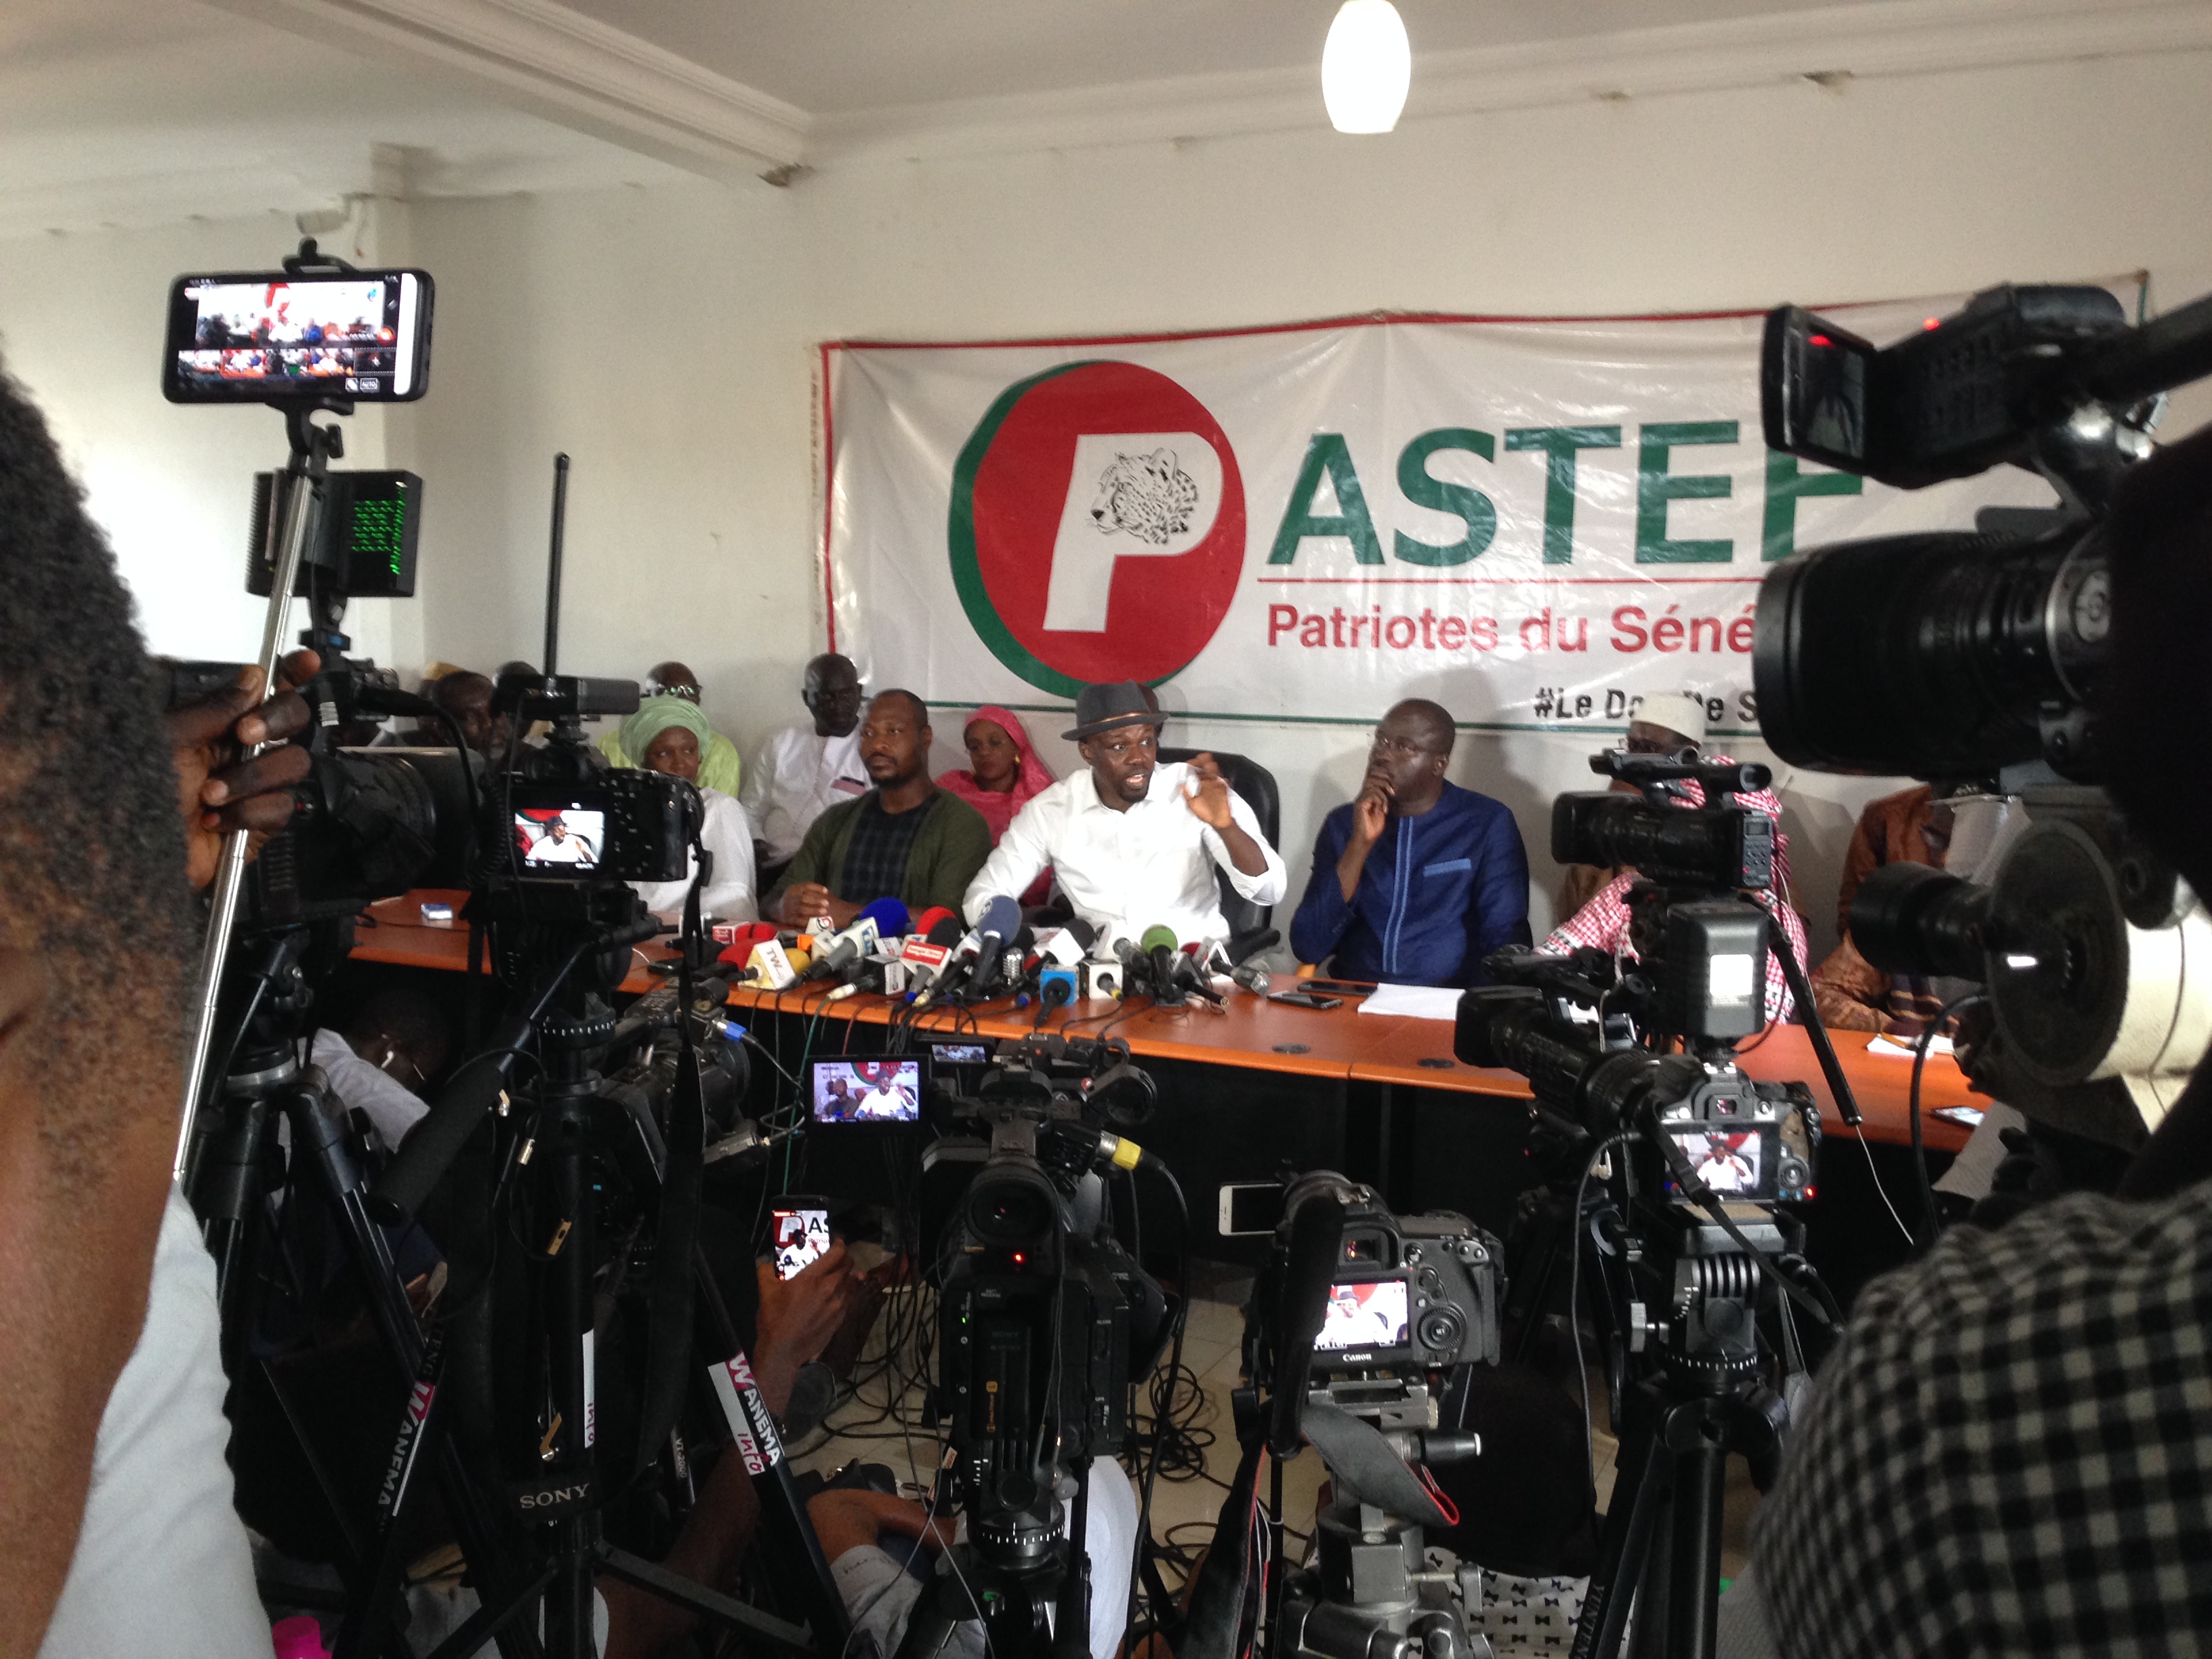 REPLAY - CONFERENCE DE PRESSE OUSMANE SONKO (VIDEO + IMAGES)